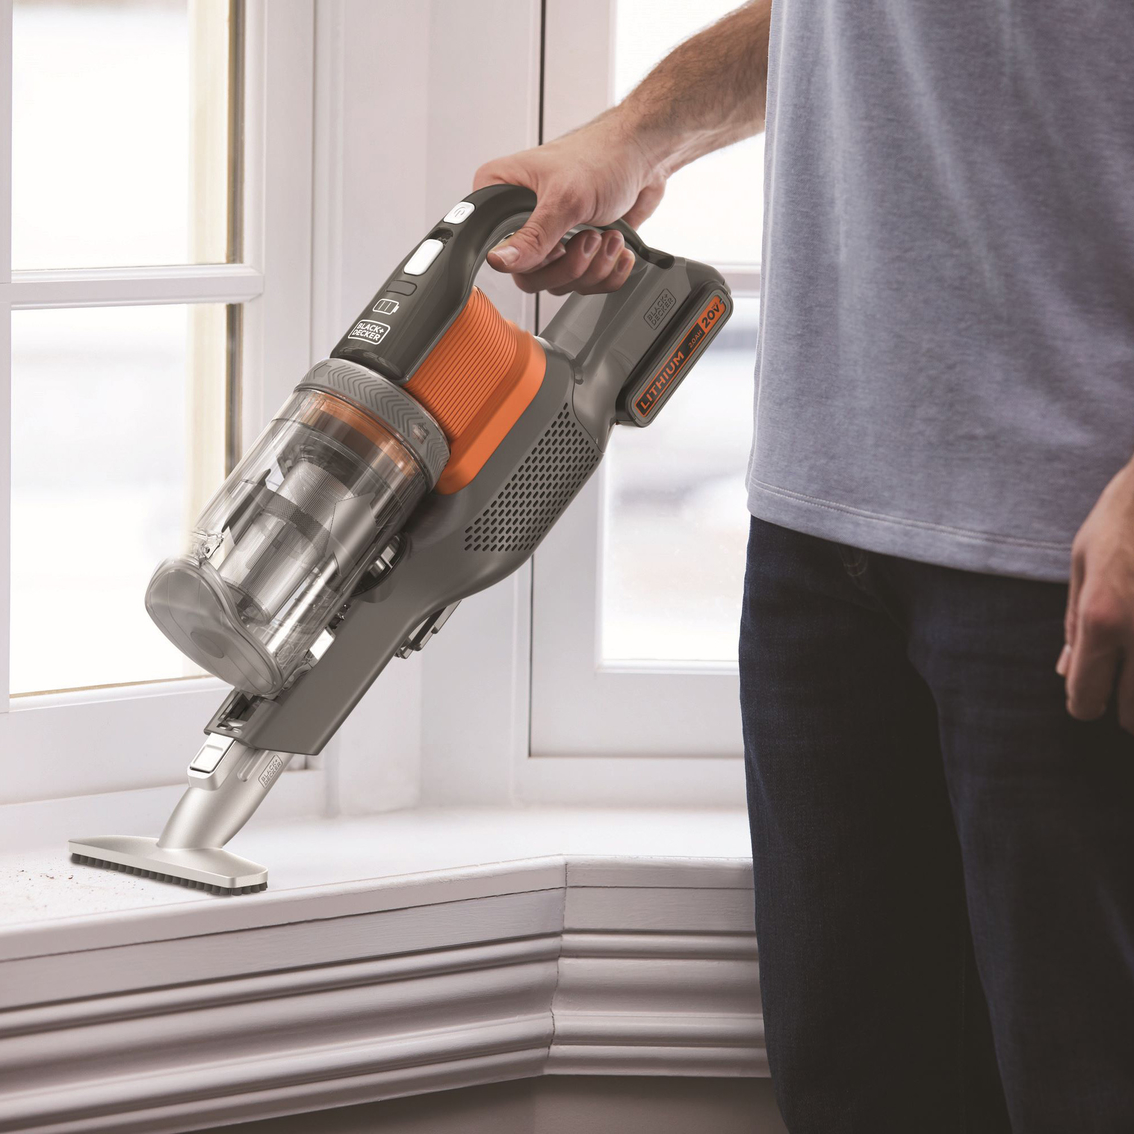 Black + Decker Powerseries Extreme Cordless Stick Vacuum Cleaner - Image 9 of 10